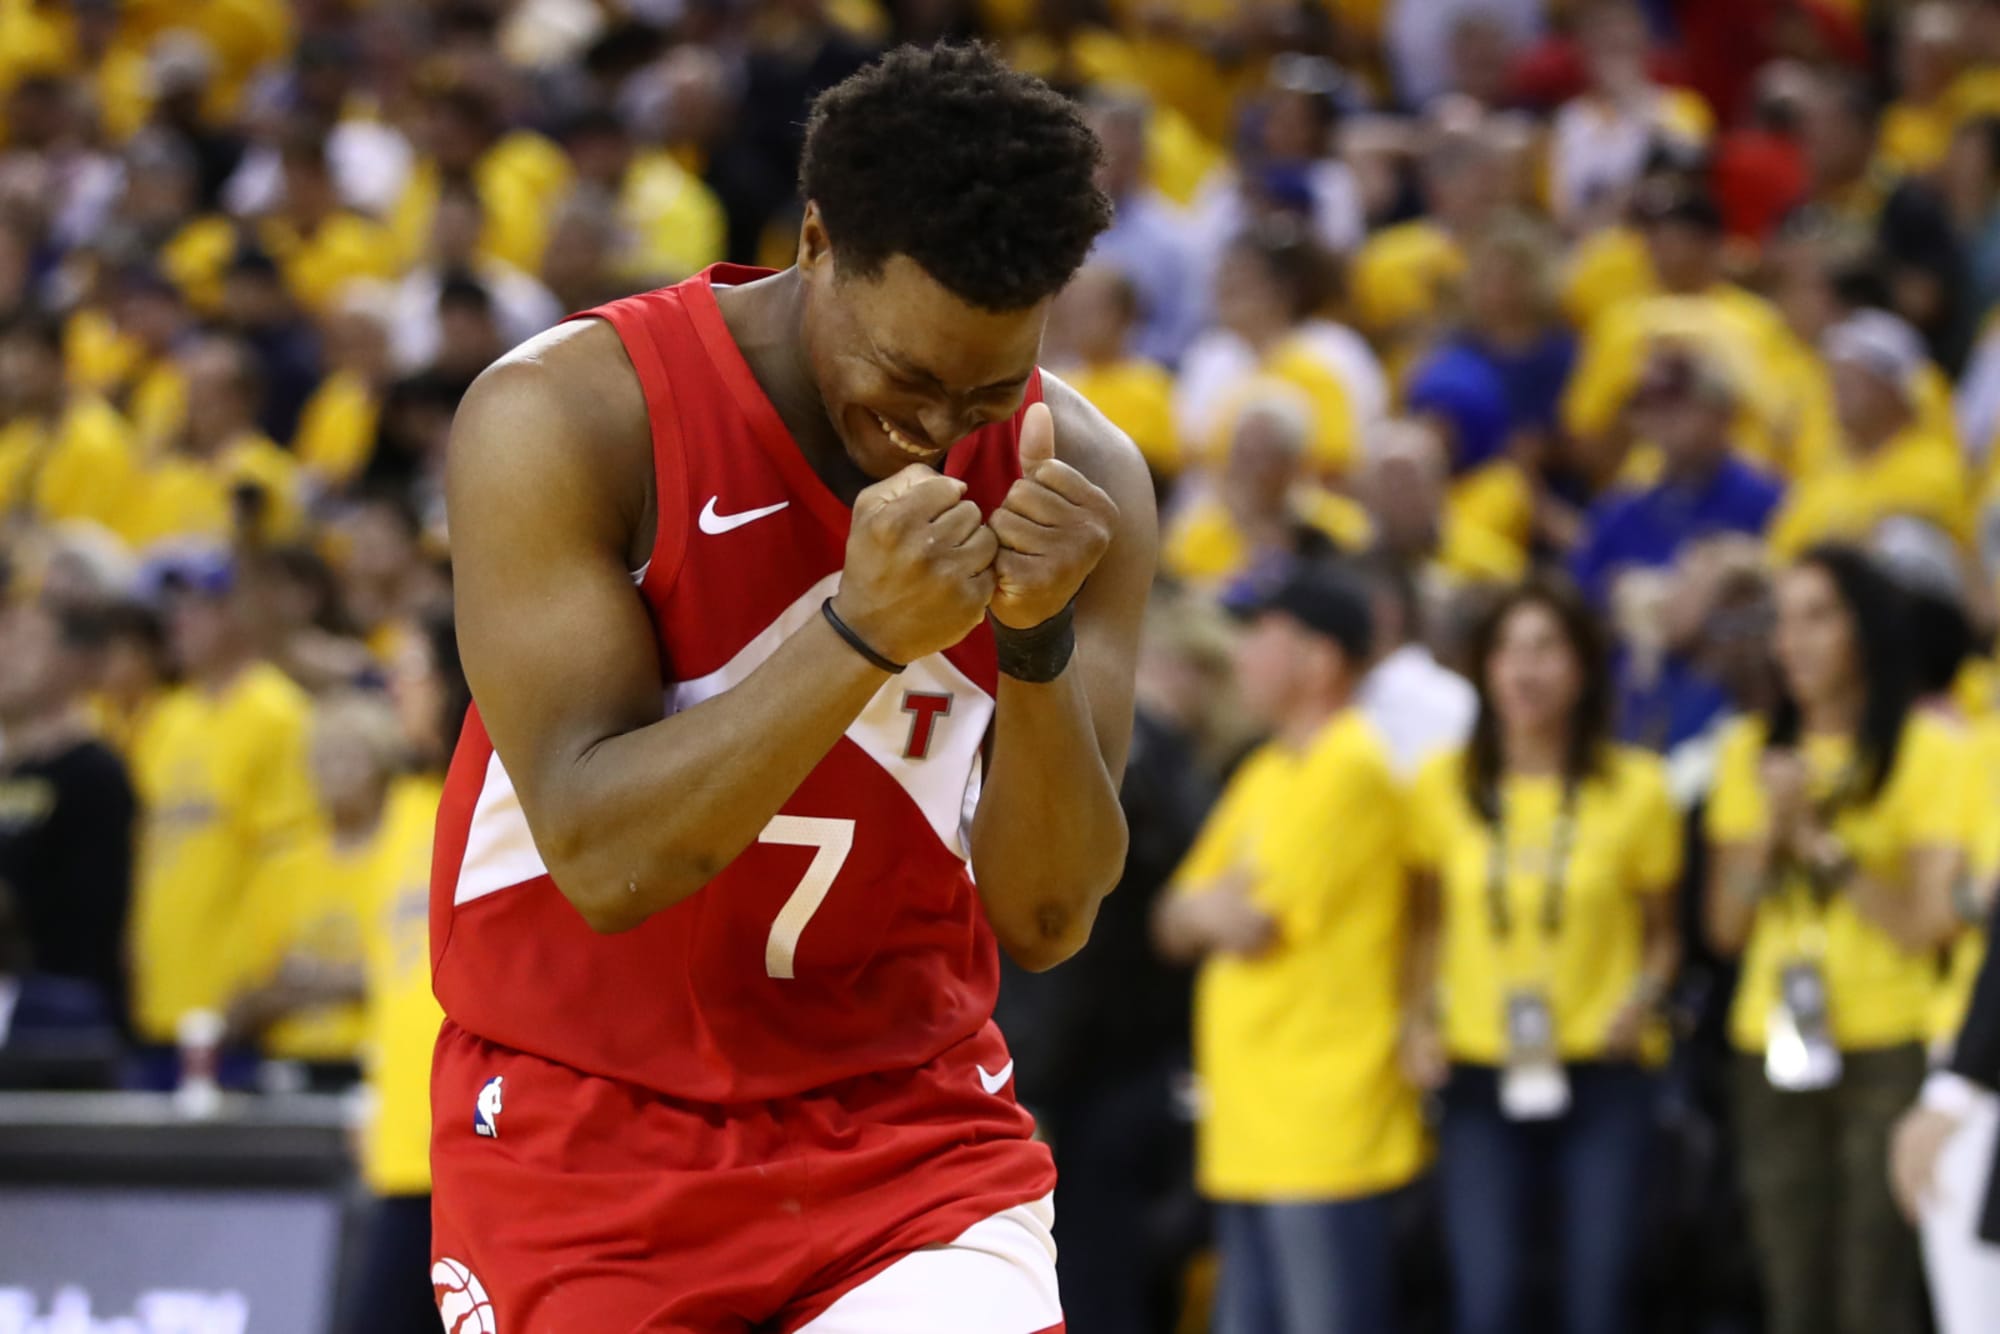 TORONTO (AP) — Kyle Lowry shrugged off his Game 1 struggles in